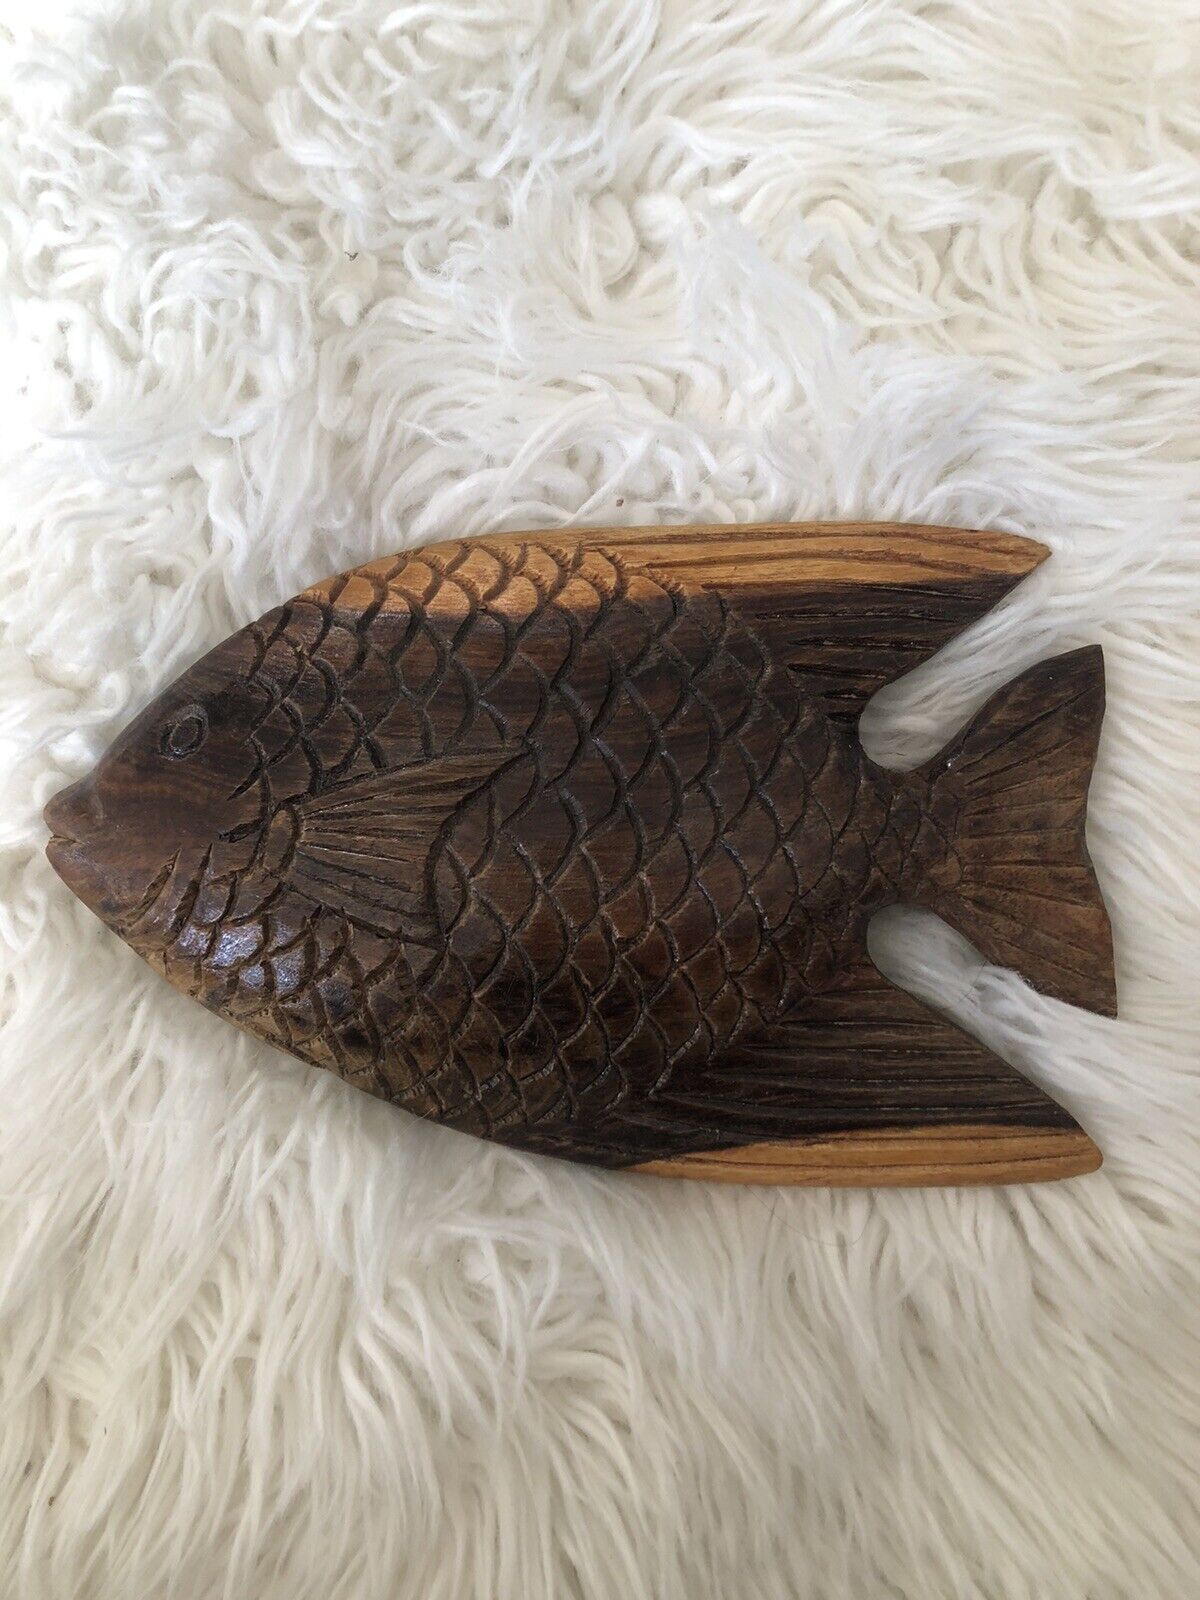 Vintage Hand Carved Wooden Tropical Fish Sculpture Intricate MCM. C8